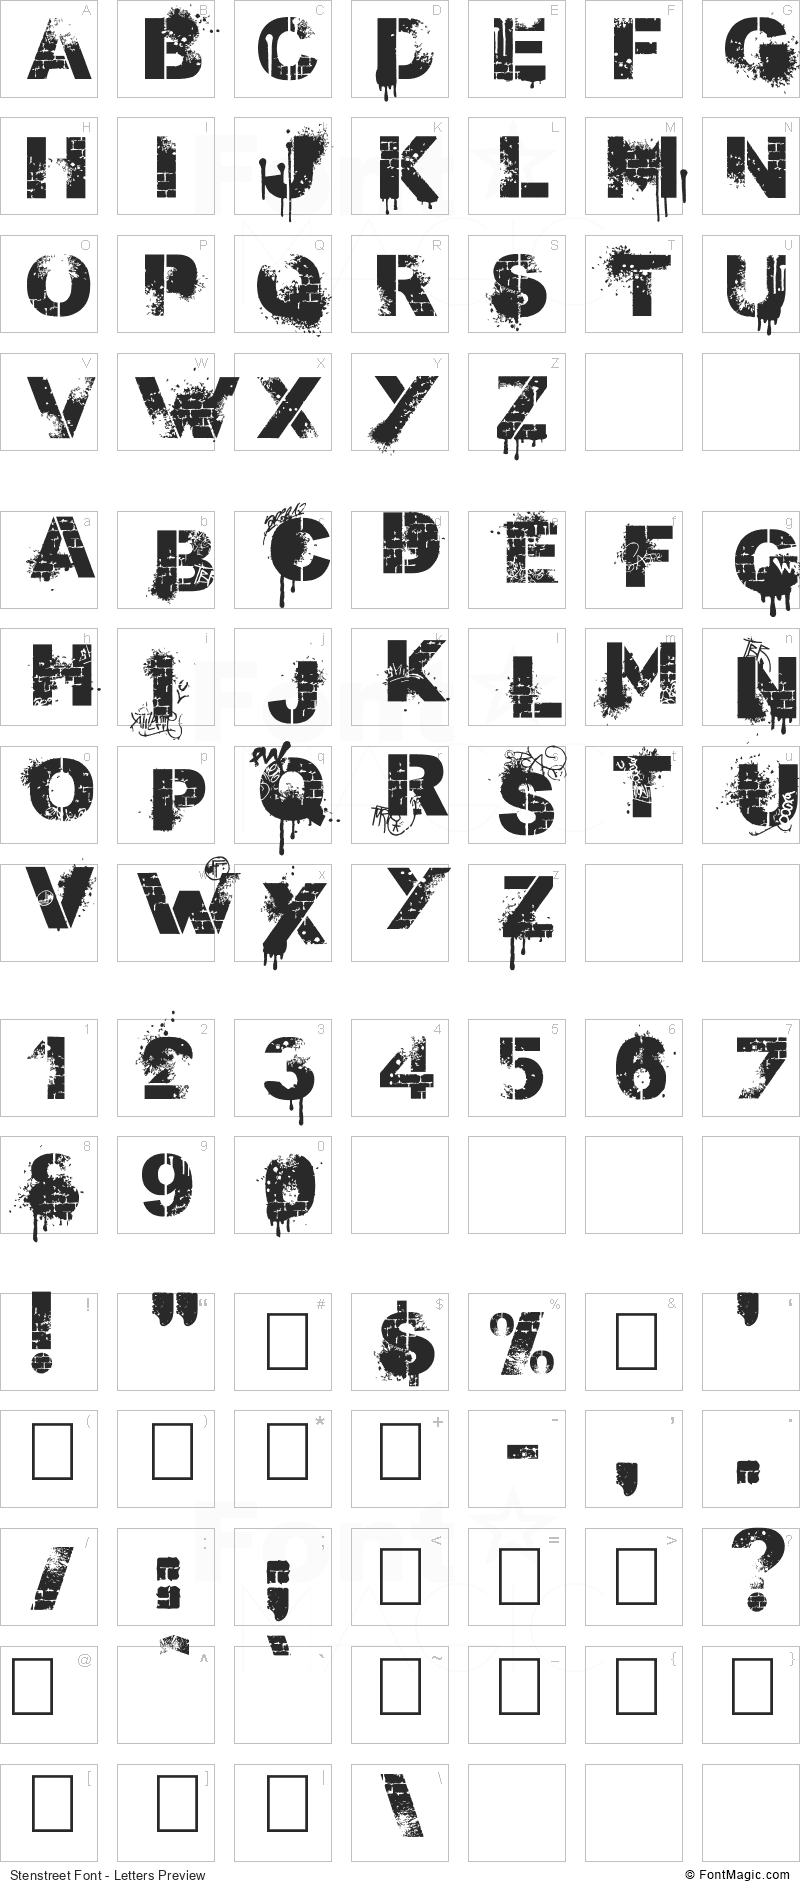 Stenstreet Font - All Latters Preview Chart